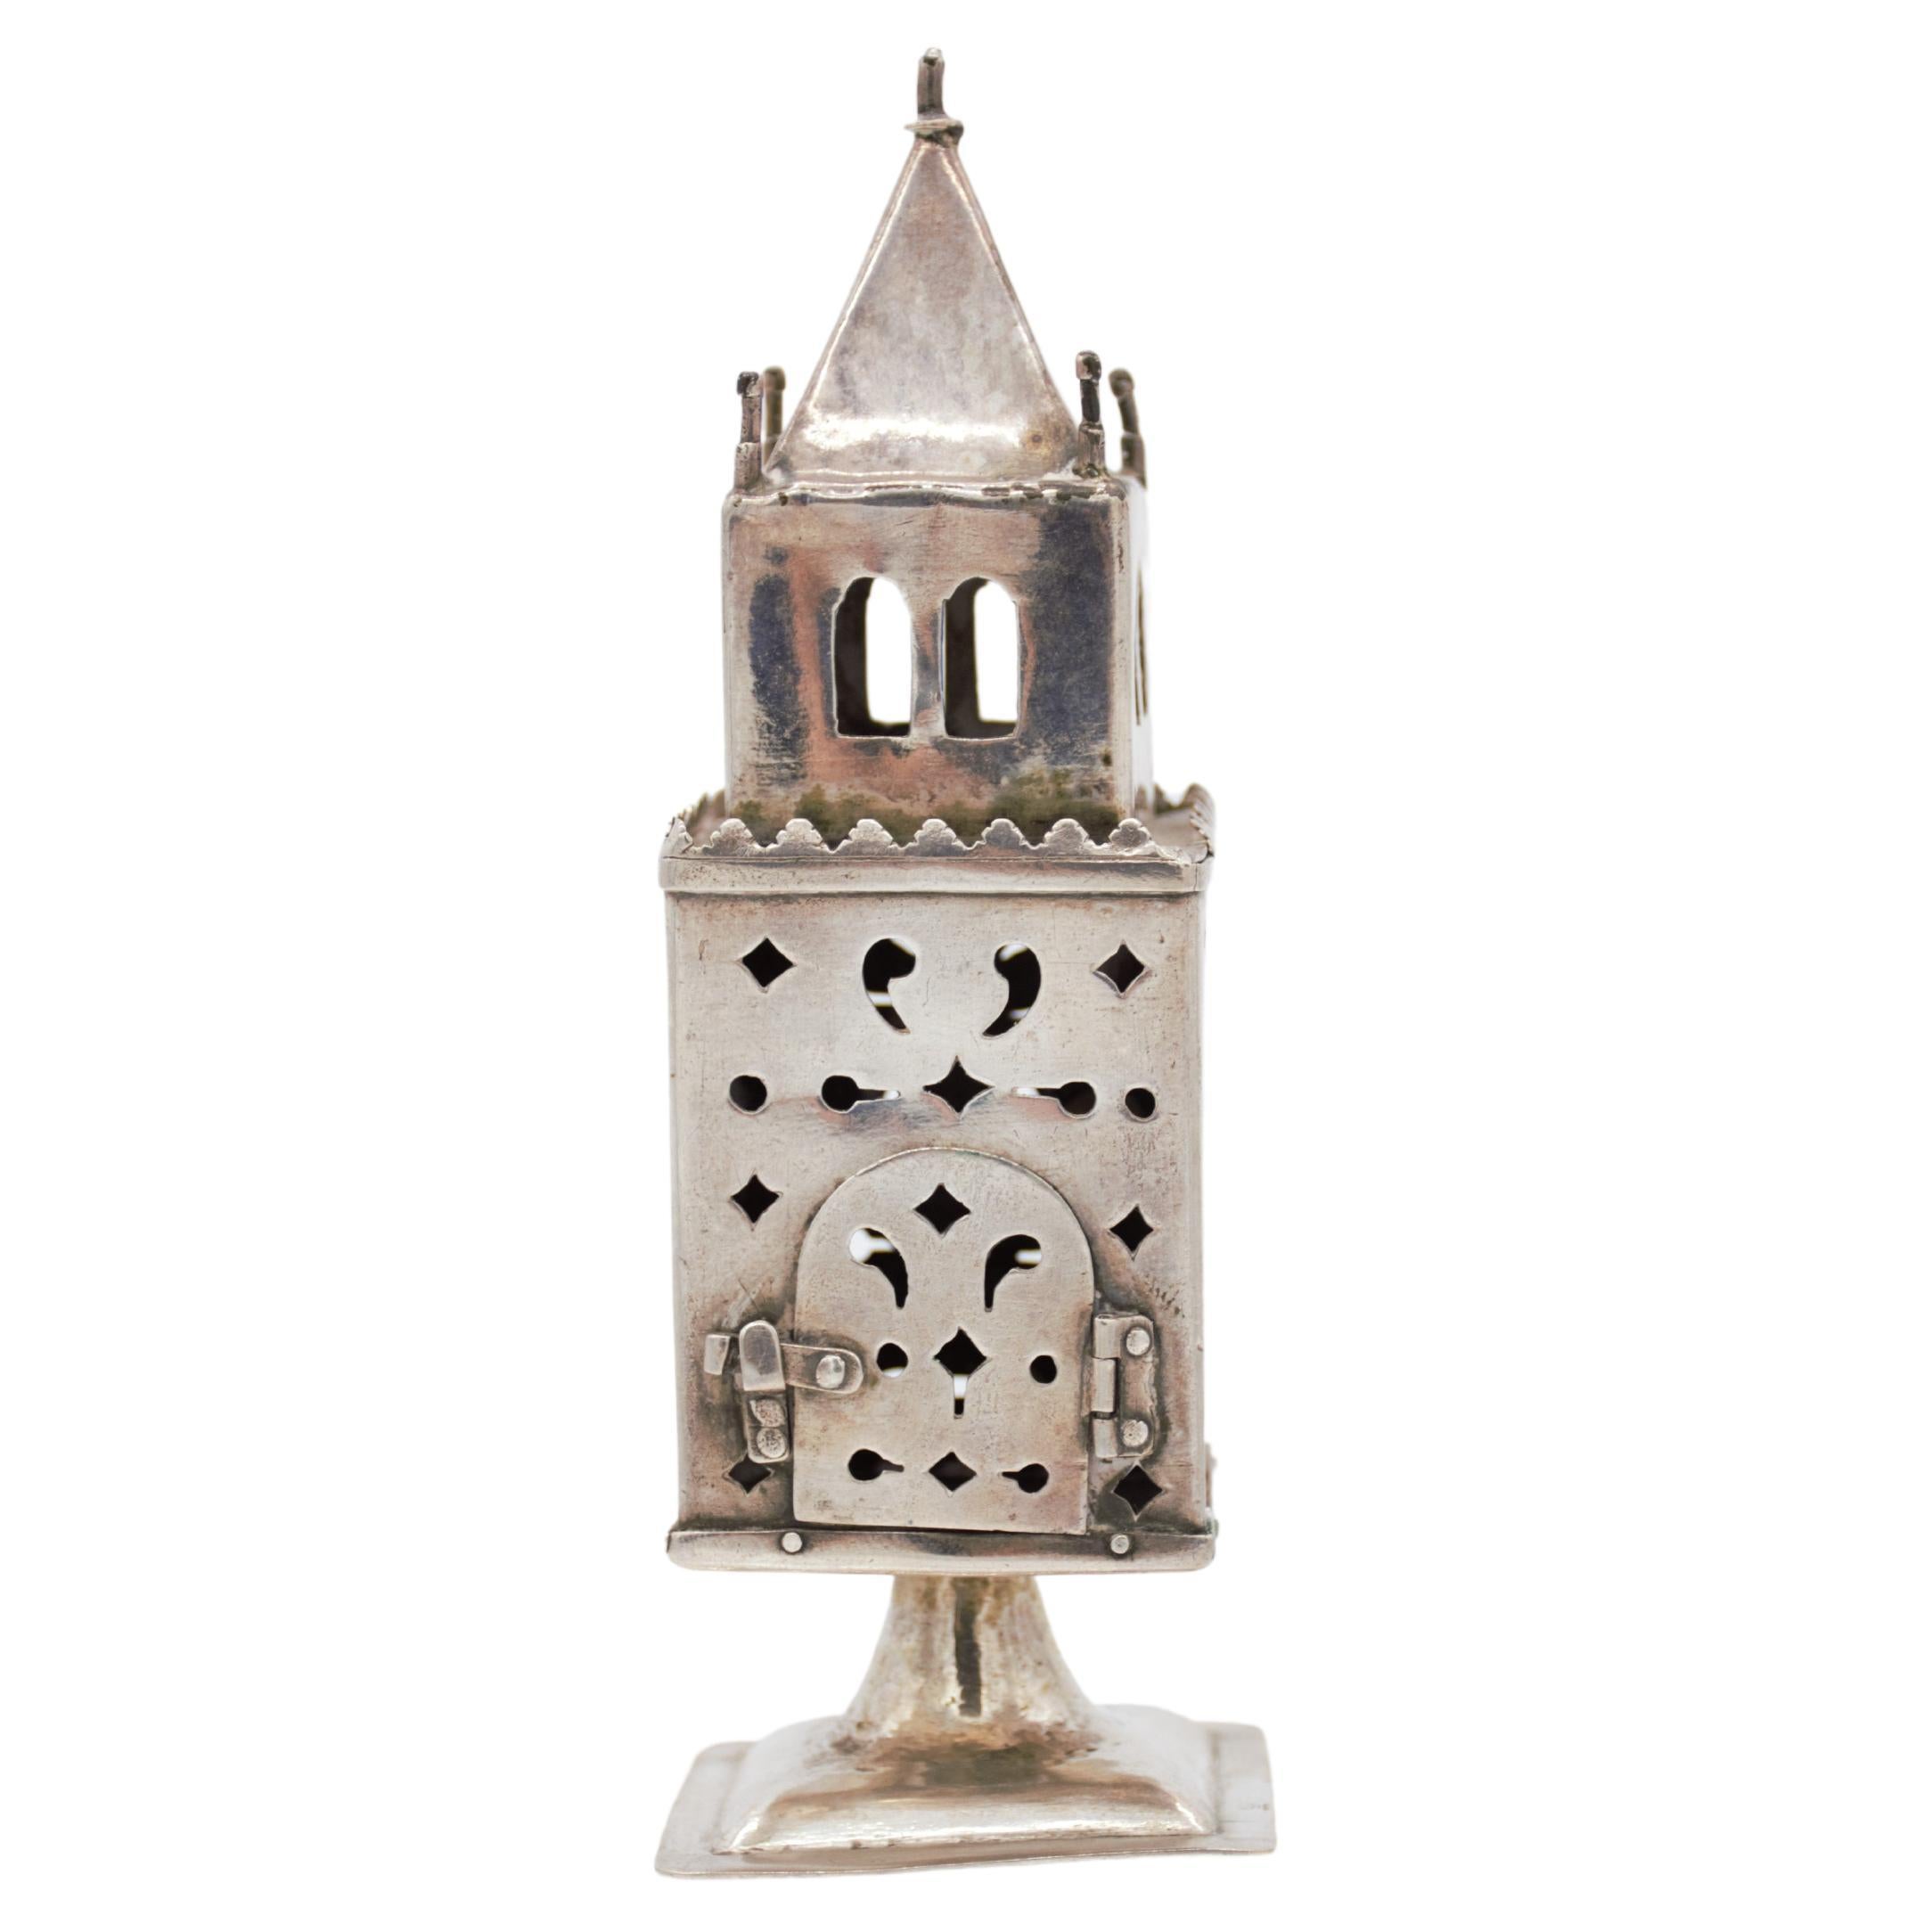  Early German Silver Augsburg Baroque Spice Tower, Hans Jacob Ernst , circa 169 For Sale